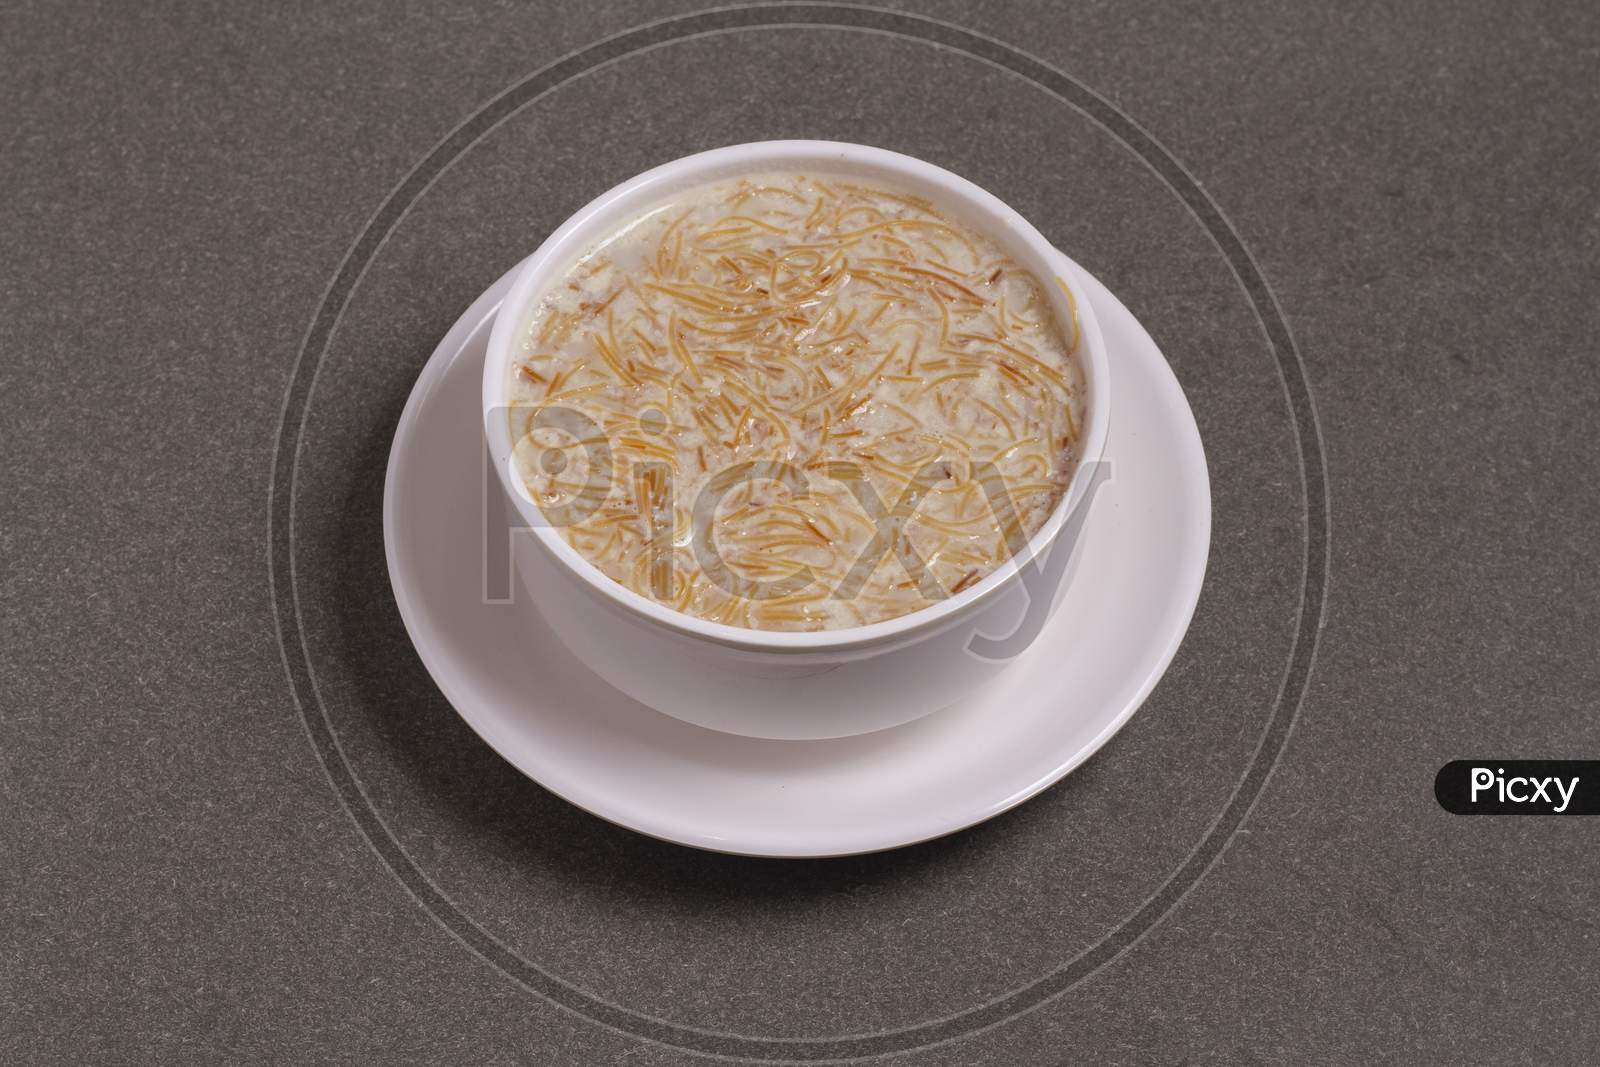 Khir Or Kheer Payasam Also Known As Sheer Khurma Seviyan Consumed Mainly On Eid Or Any Other Festival In India / Asia. Served With Dried Fruit Schnitzel In A Bowl On A Colorful / Wooden Background.